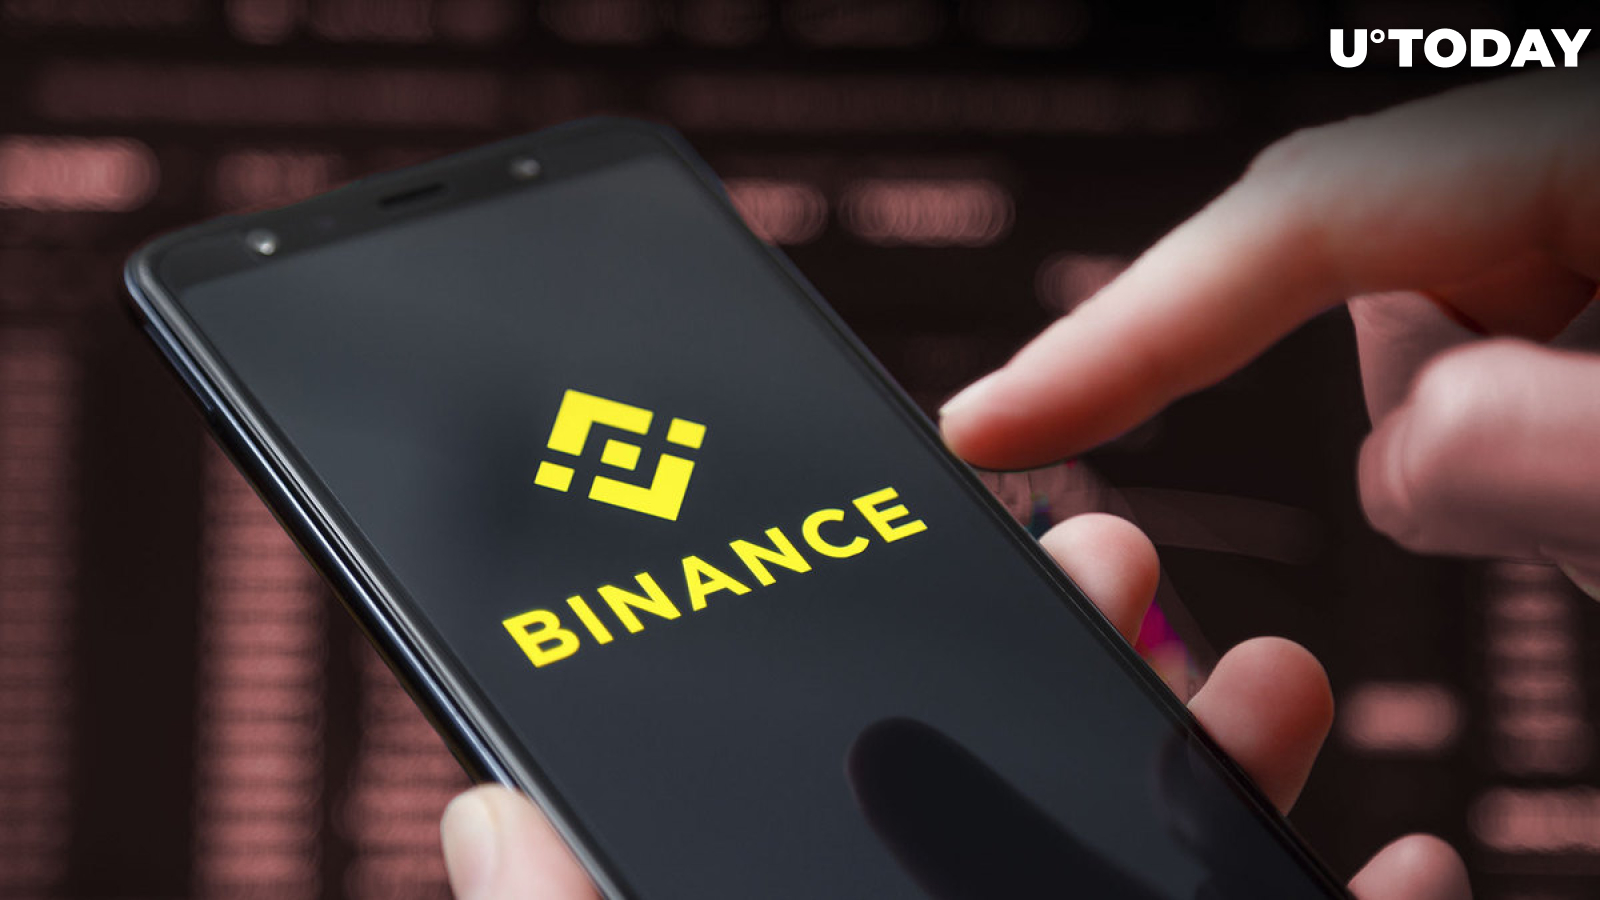 Binance Market Share Drops to One-Year Low: Details